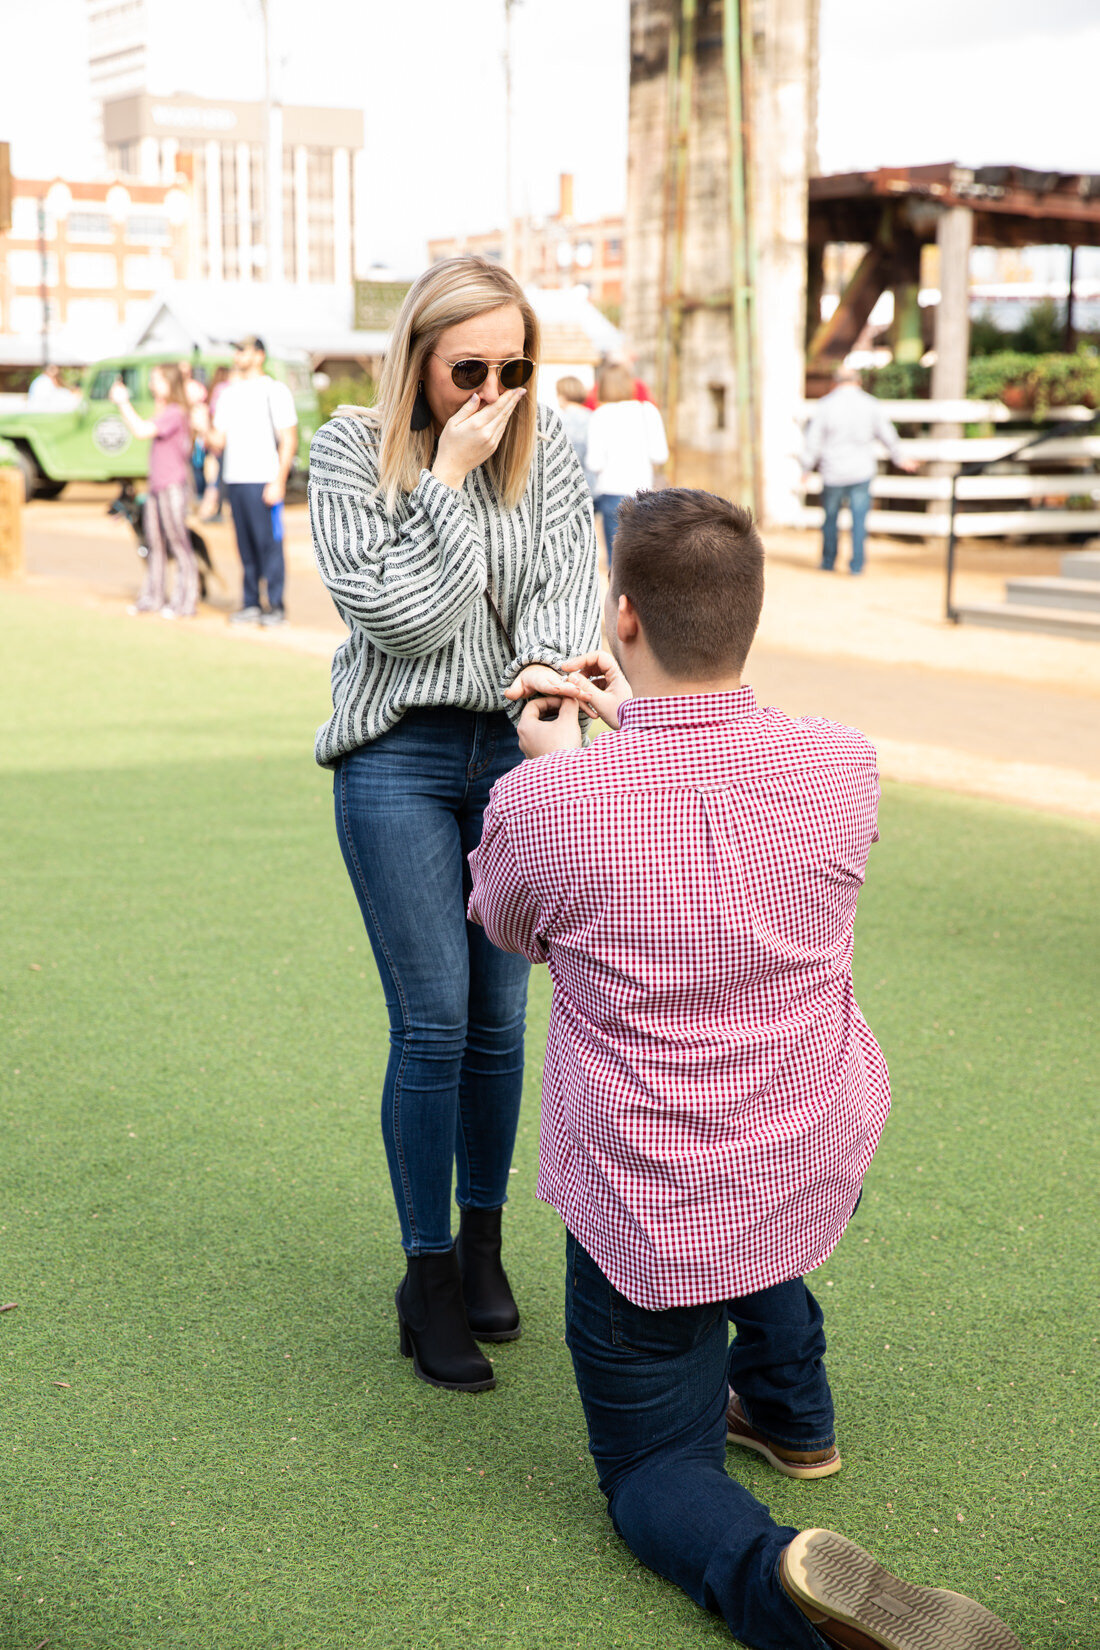 A man is kneeling down to propose to a woman on a grassy field, captured beautifully by an Austin wedding photographer.